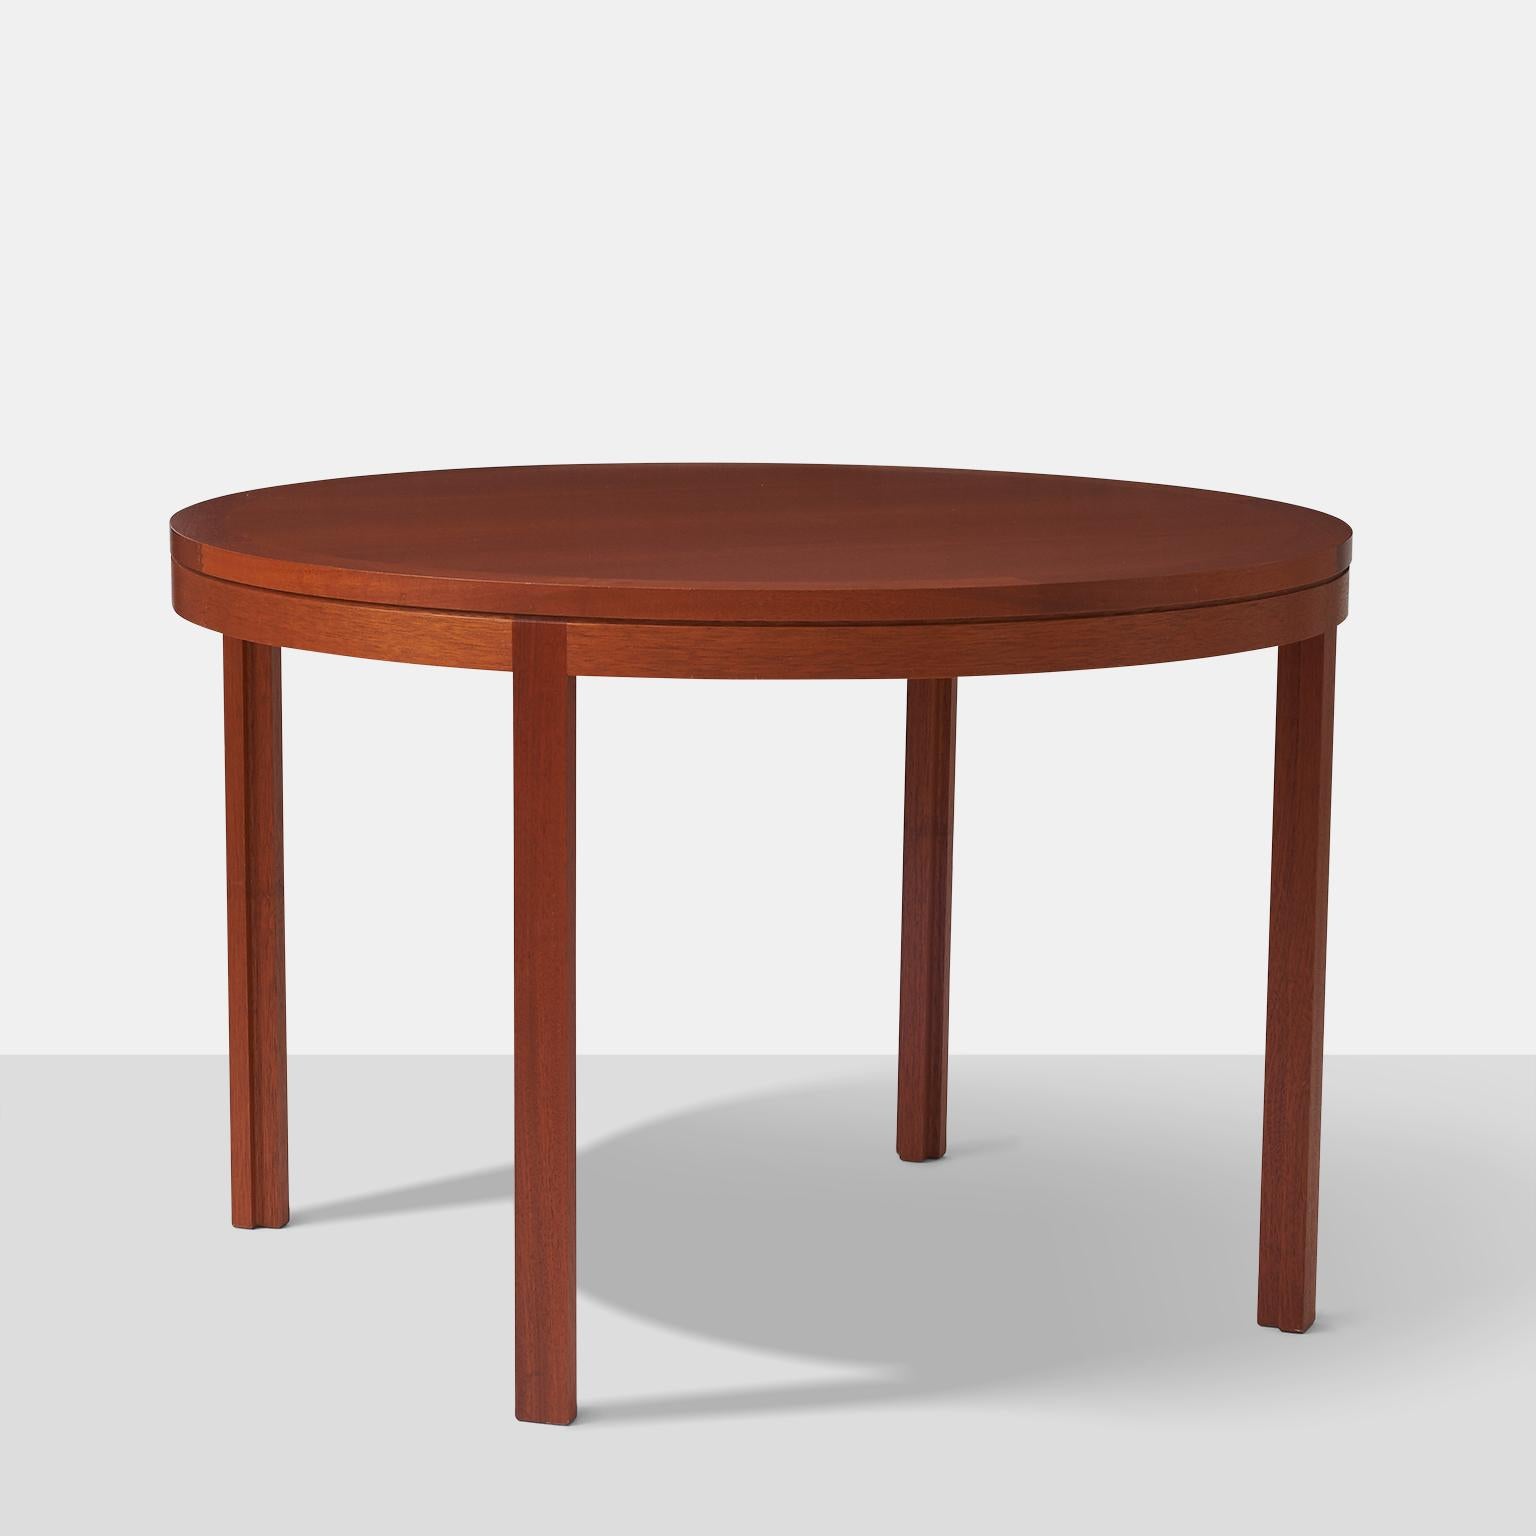 A round mahogany dining table with parson's legs. Manufactured by Botium.